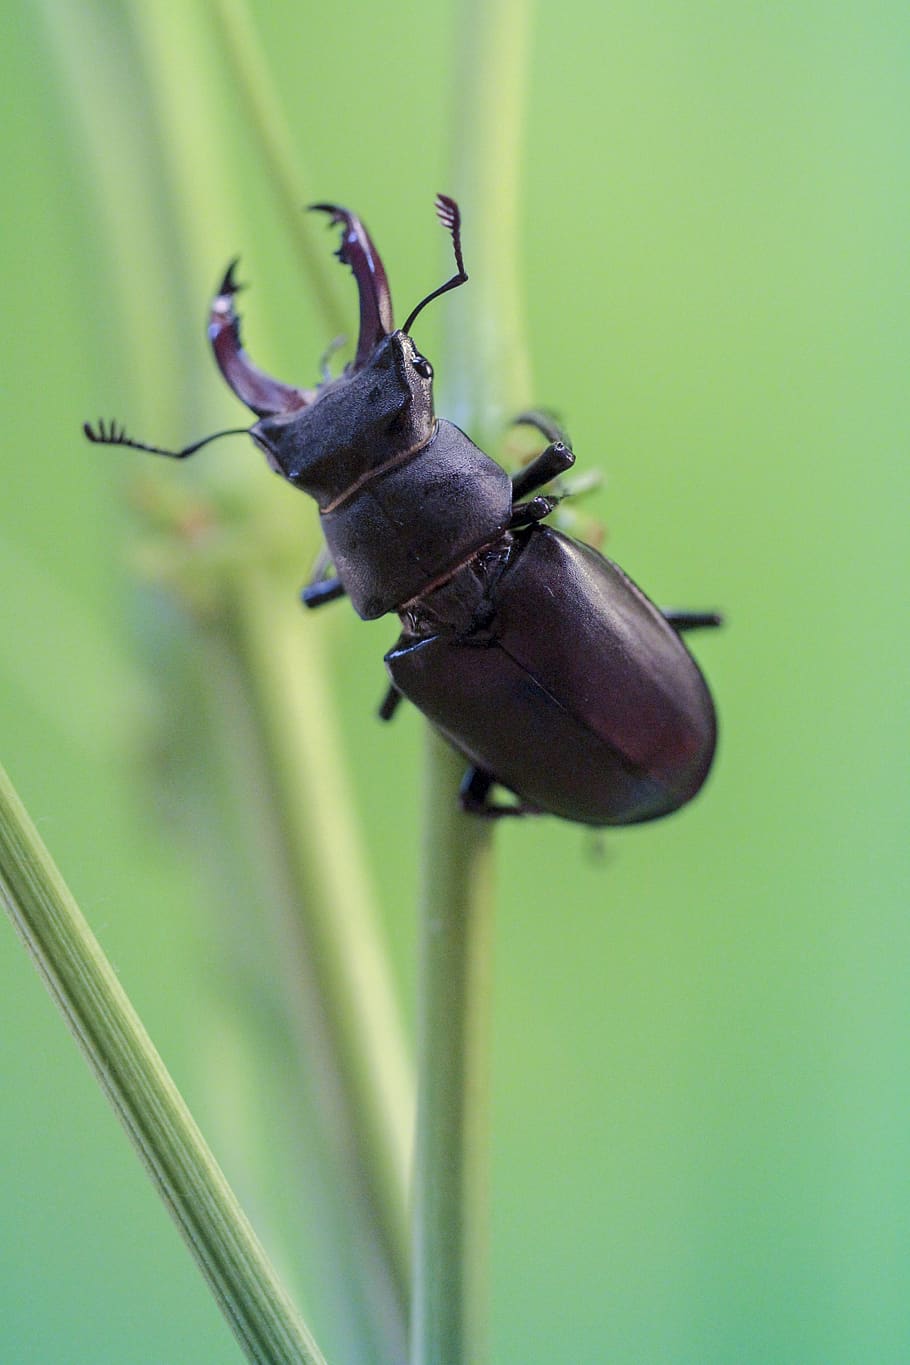 stag beetle, extension, insect, exoskeleton, mouth, strong, invertebrate, nature, green, animal